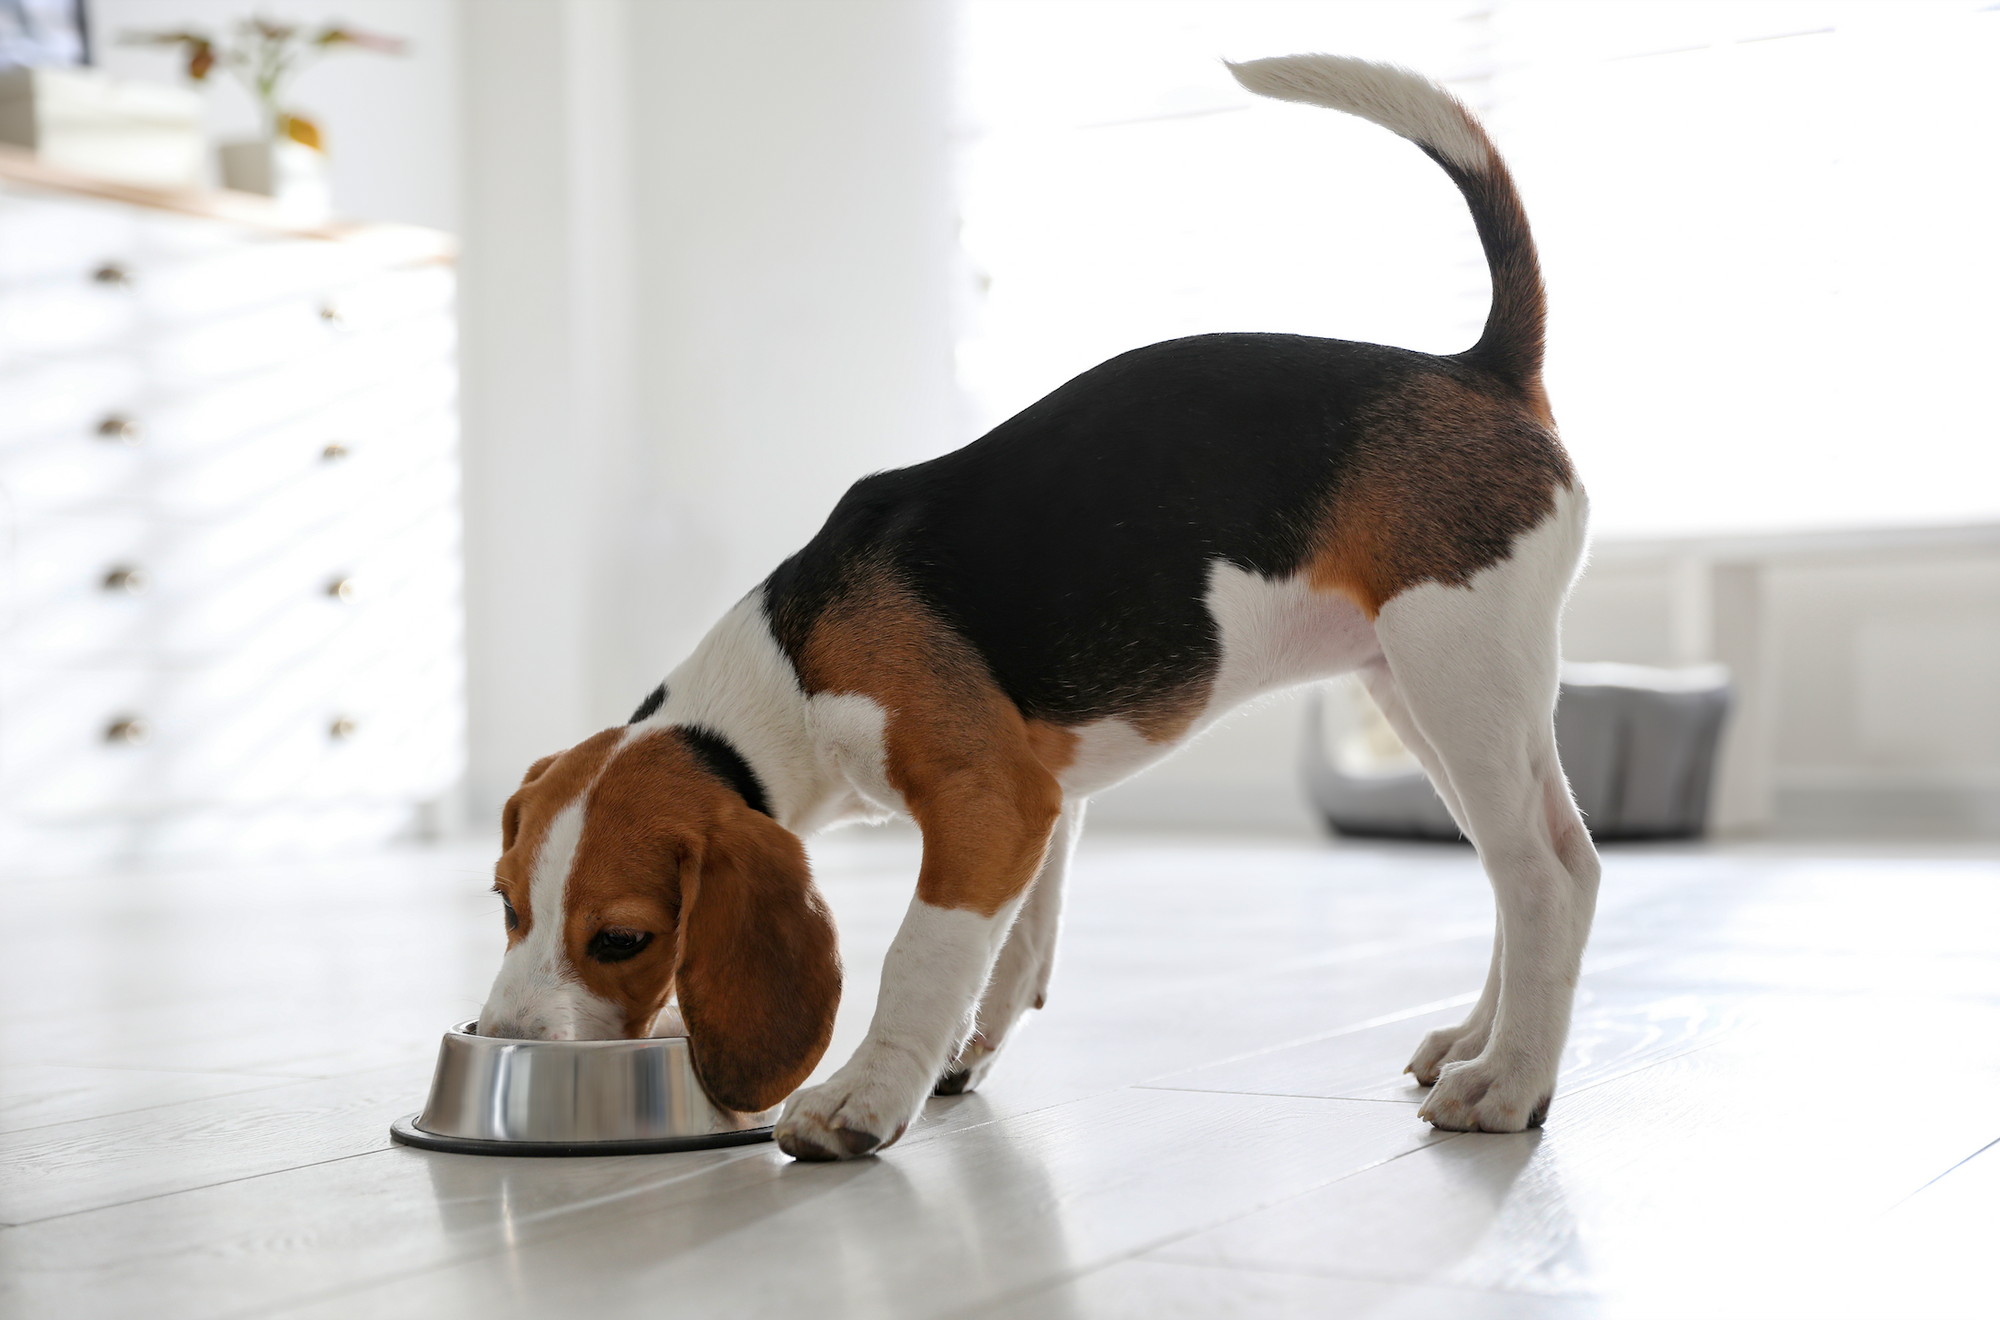 A beagle dog eating from a bowl indoors.